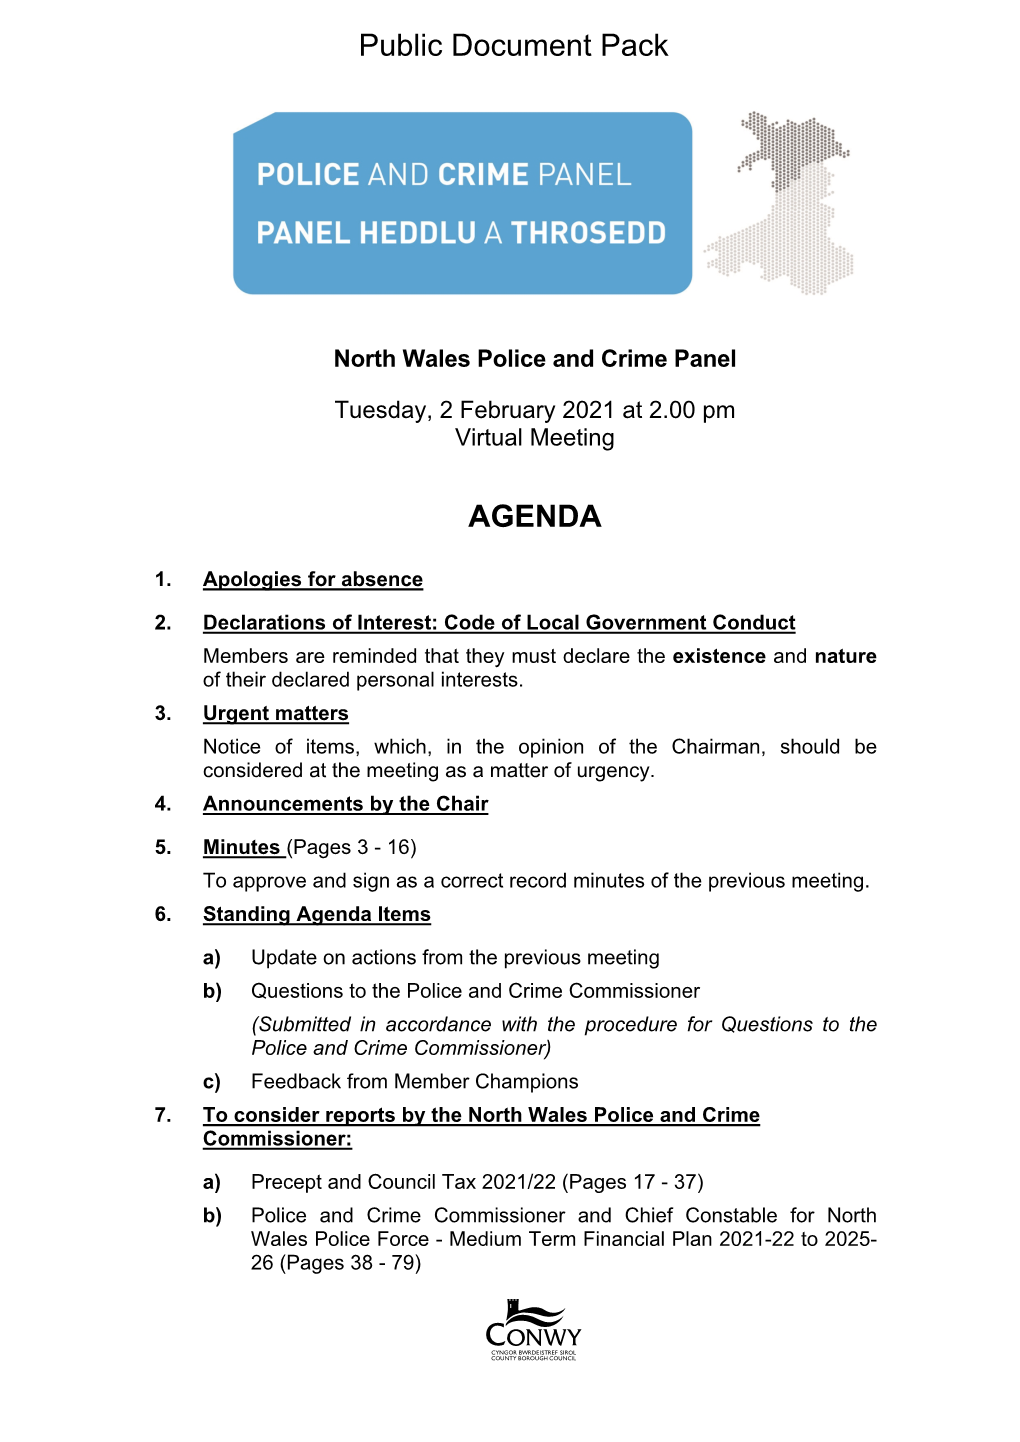 Agenda Document for North Wales Police and Crime Panel, 02/02